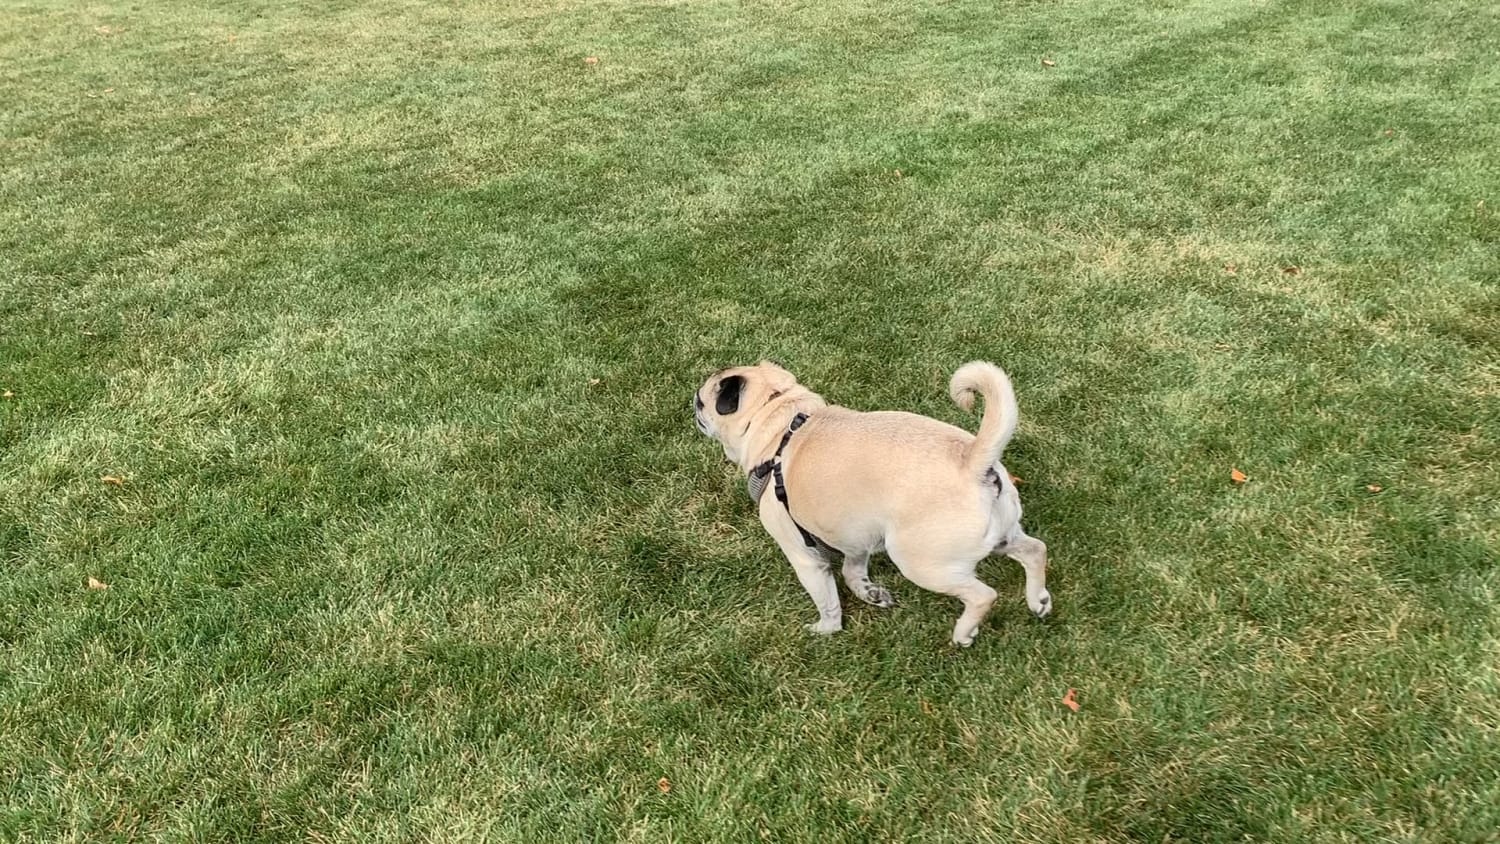 13 year old Brutus was feeling spunky today and got in some old timer zoomies!